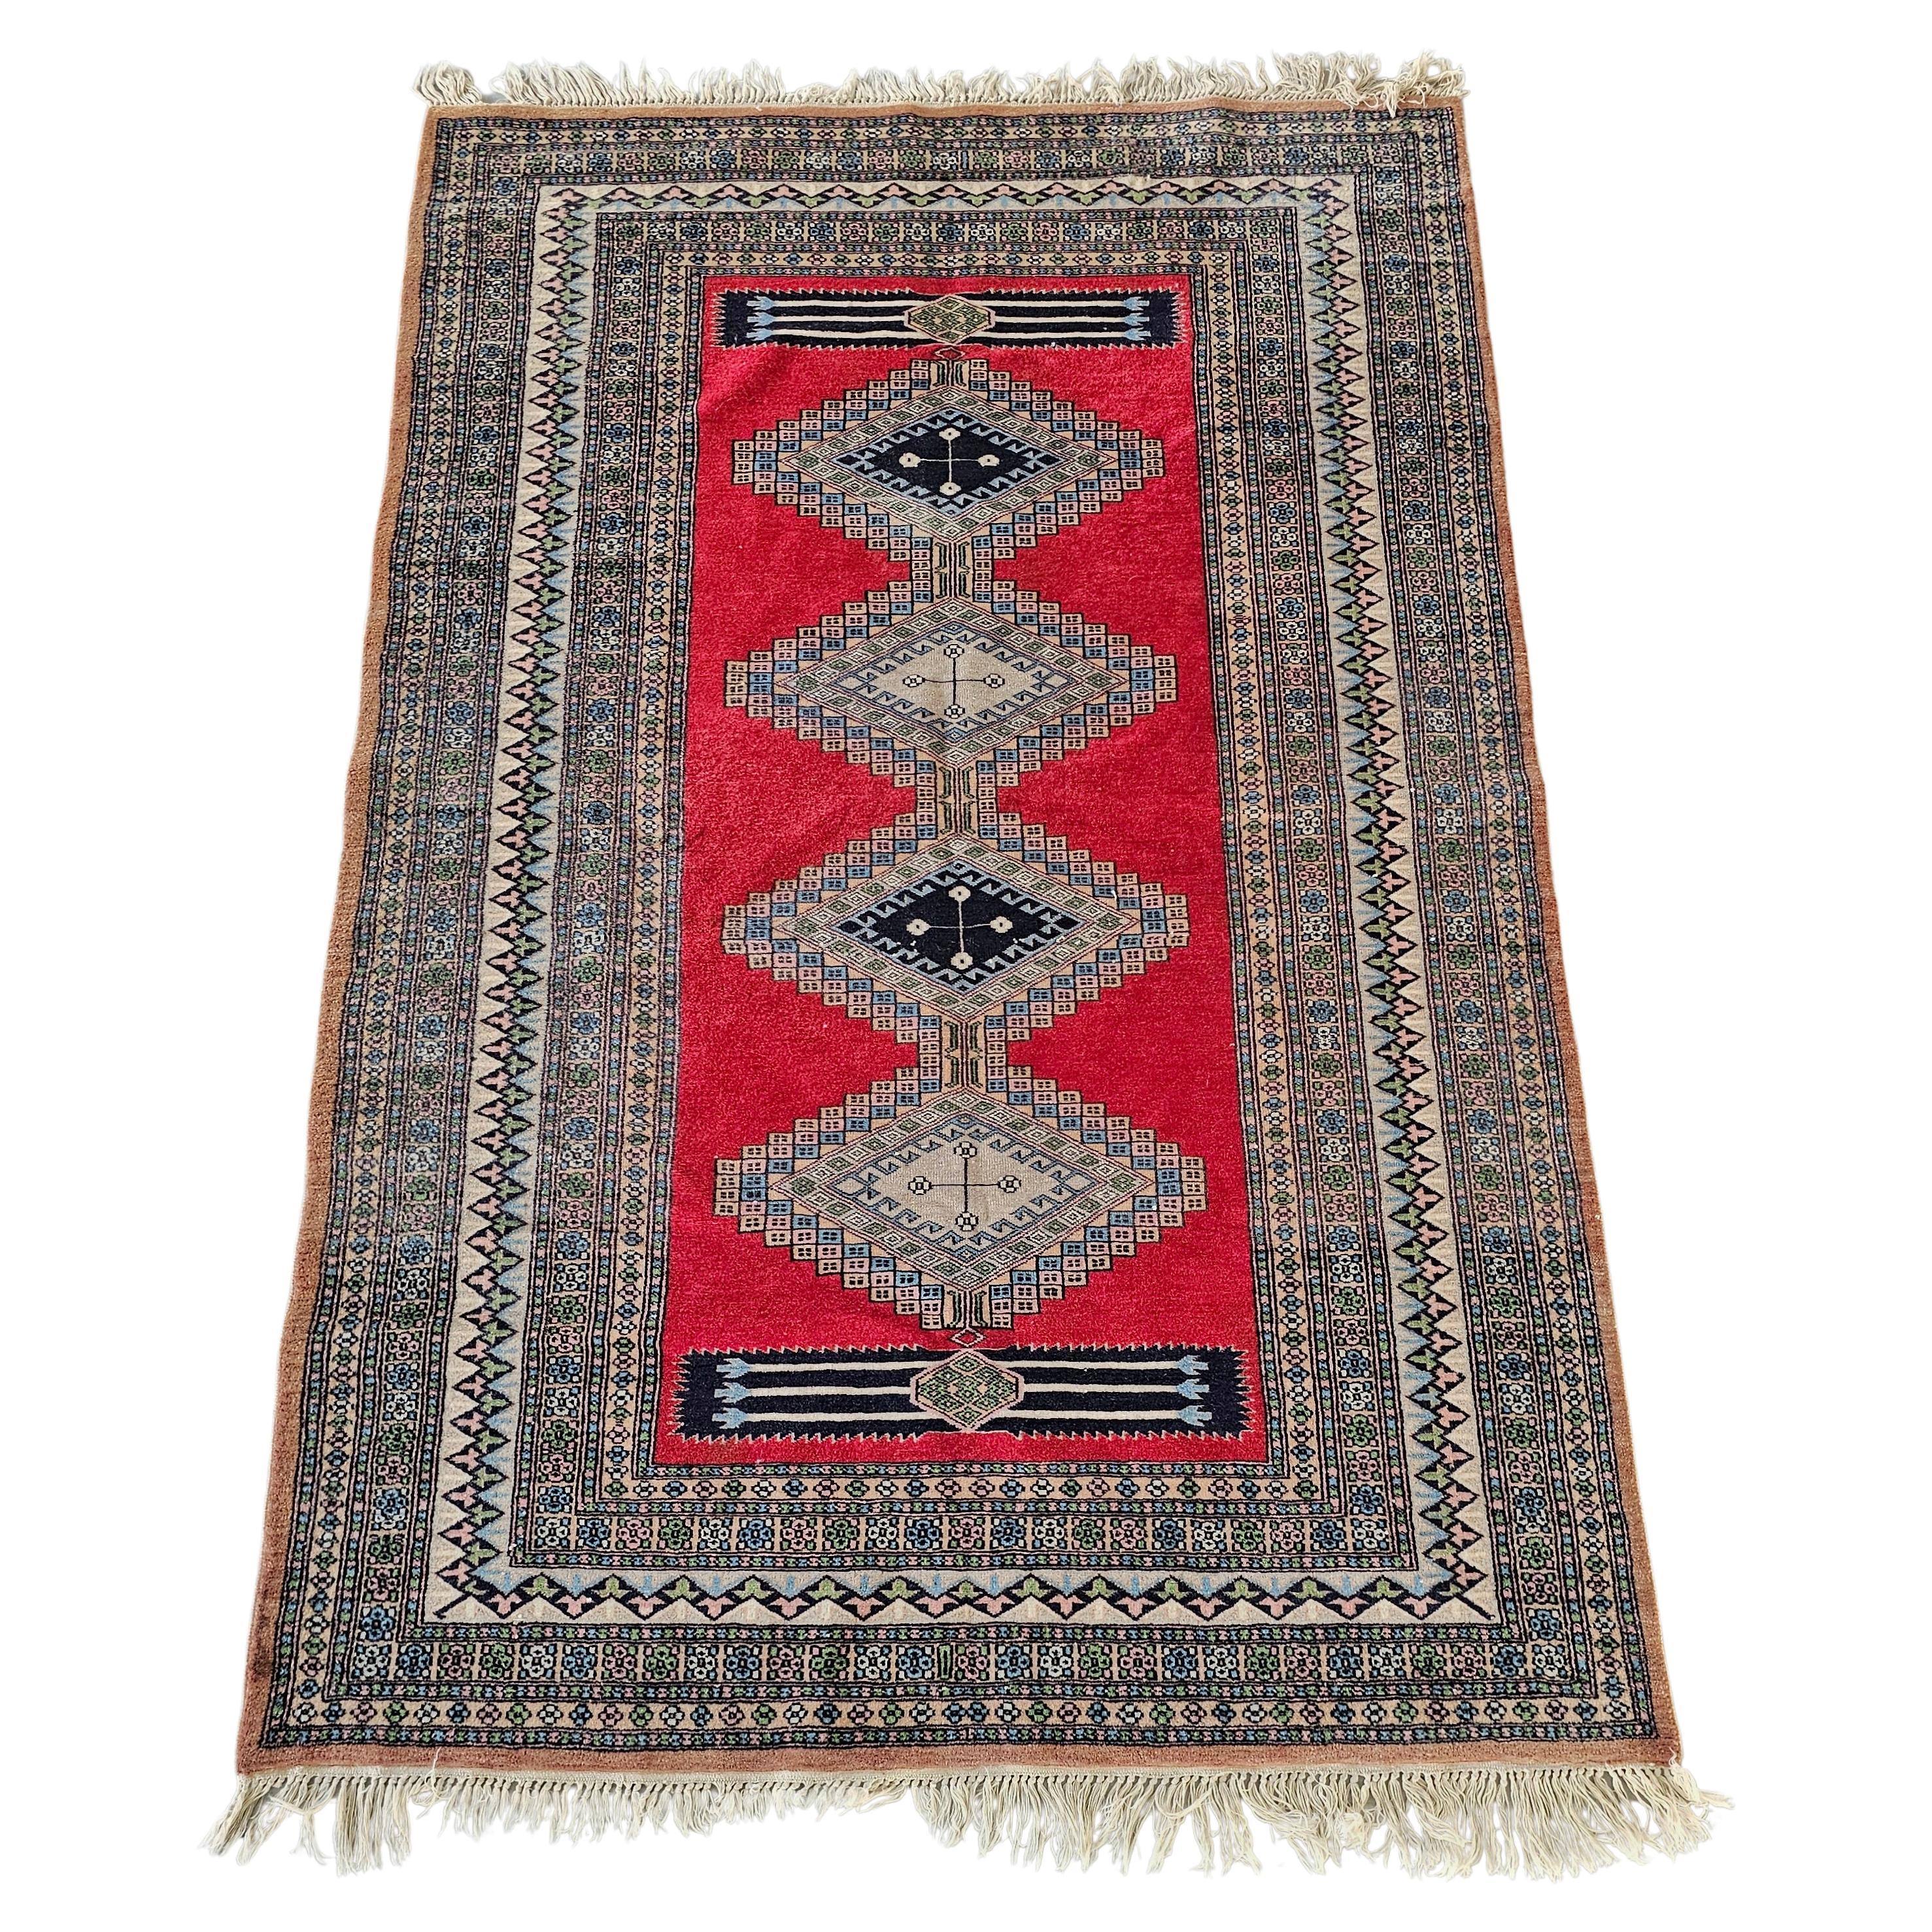 Ghom Rug with unique patterns, handknotted in 100% fine wool, Pakistan 1930s